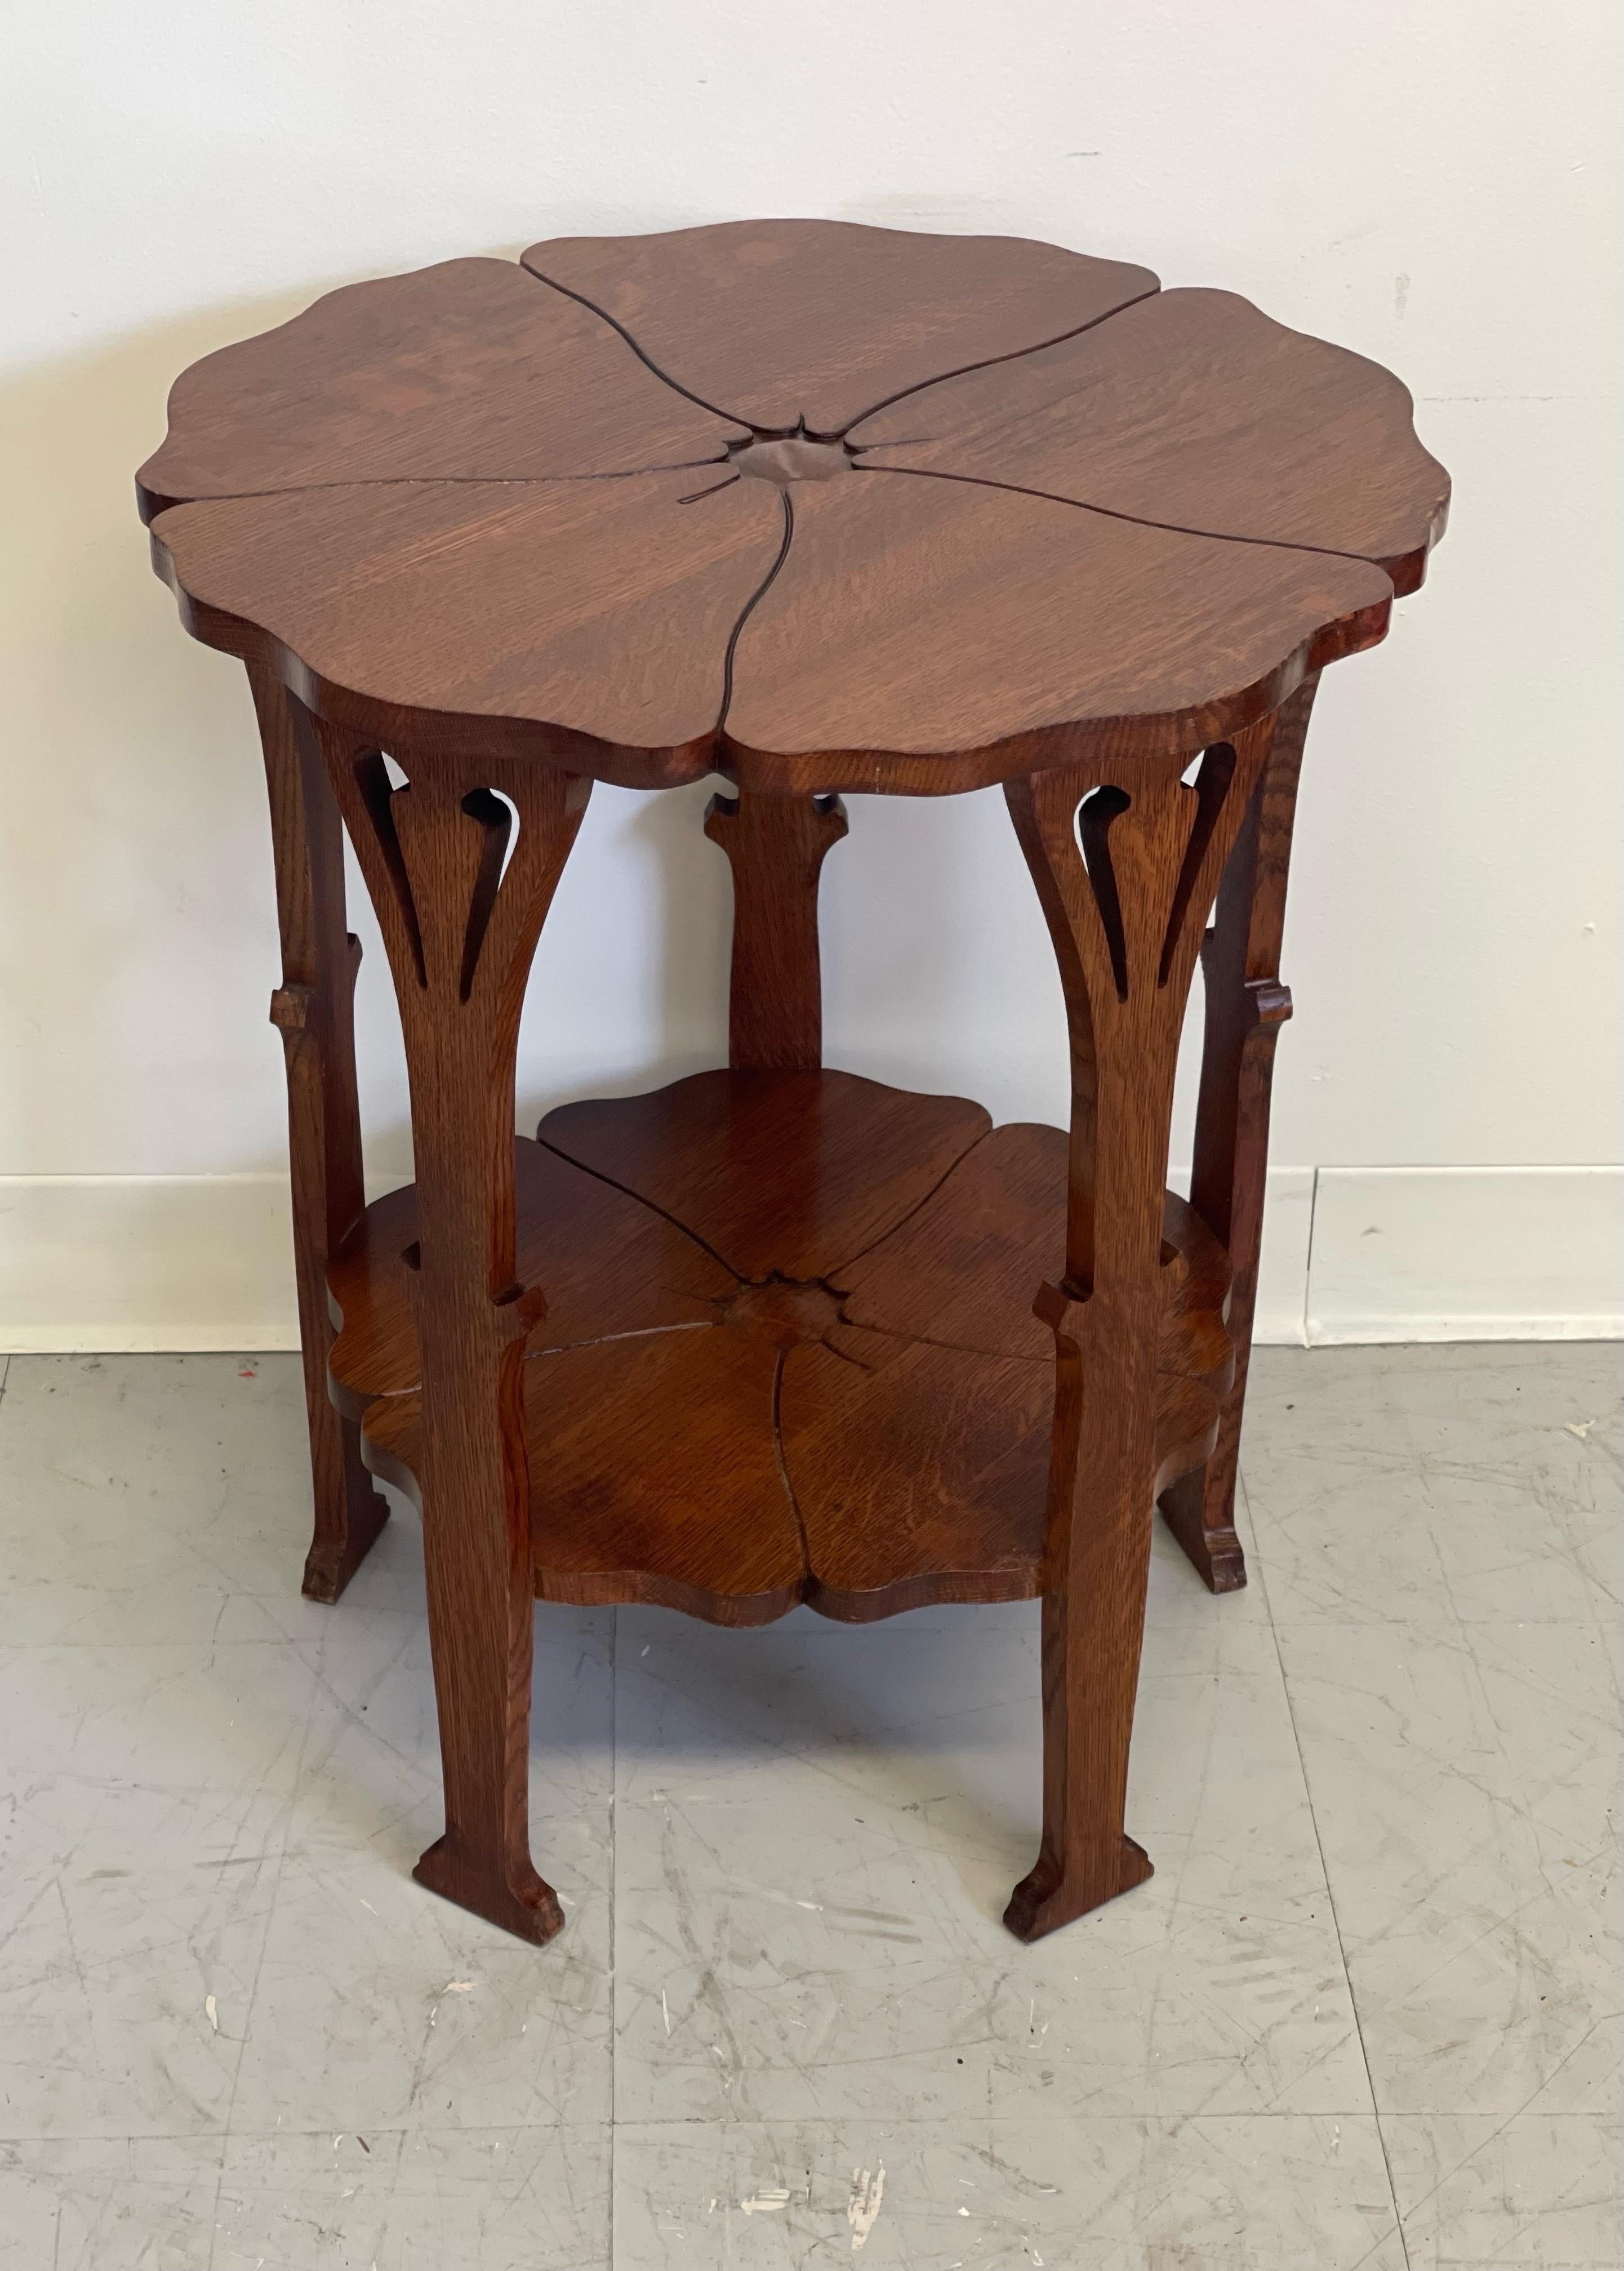 Art Deco Delicately Designed Antique Gustave Stickily Poppy Table With Floral Motif For Sale